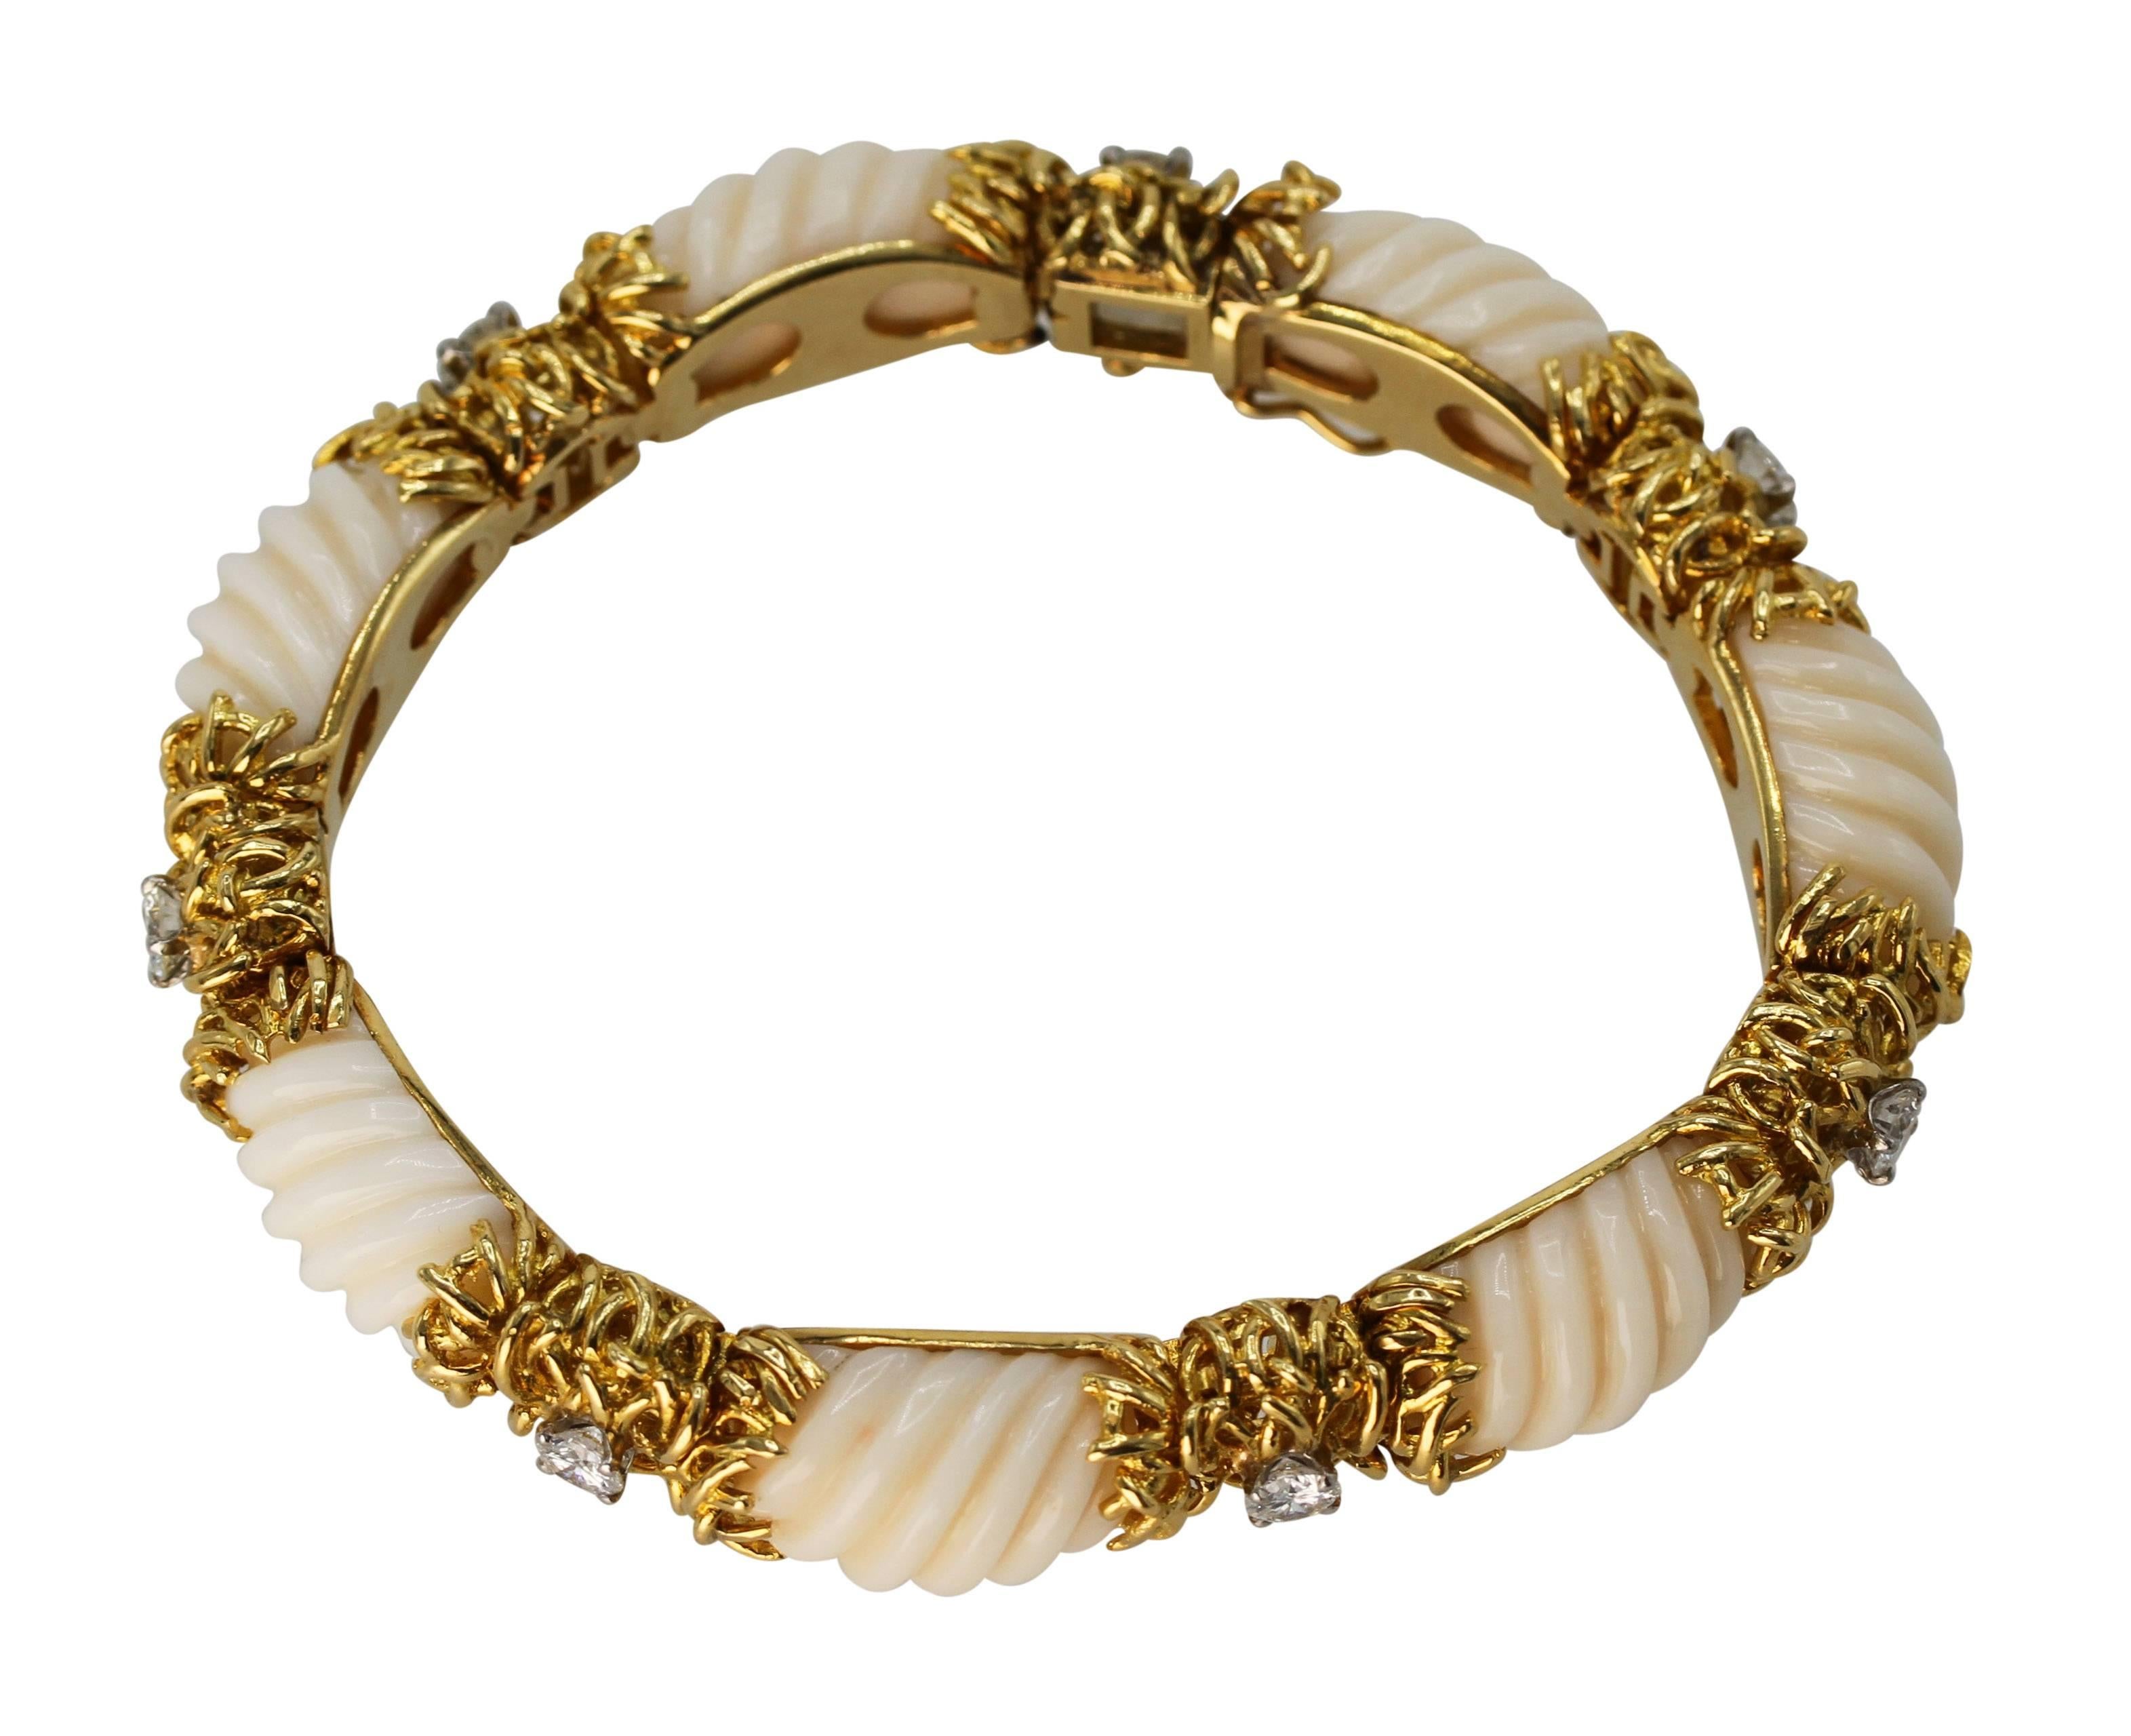 18 Karat Gold, Fluted Coral and Diamond Bracelet, circa 1970
• Stamped 18K
• Seven fluted coral sections
• 7 round diamonds approximately 2.00 carats
• Length 7 inches, width 3/8 inch, gross weight 67.0 grams